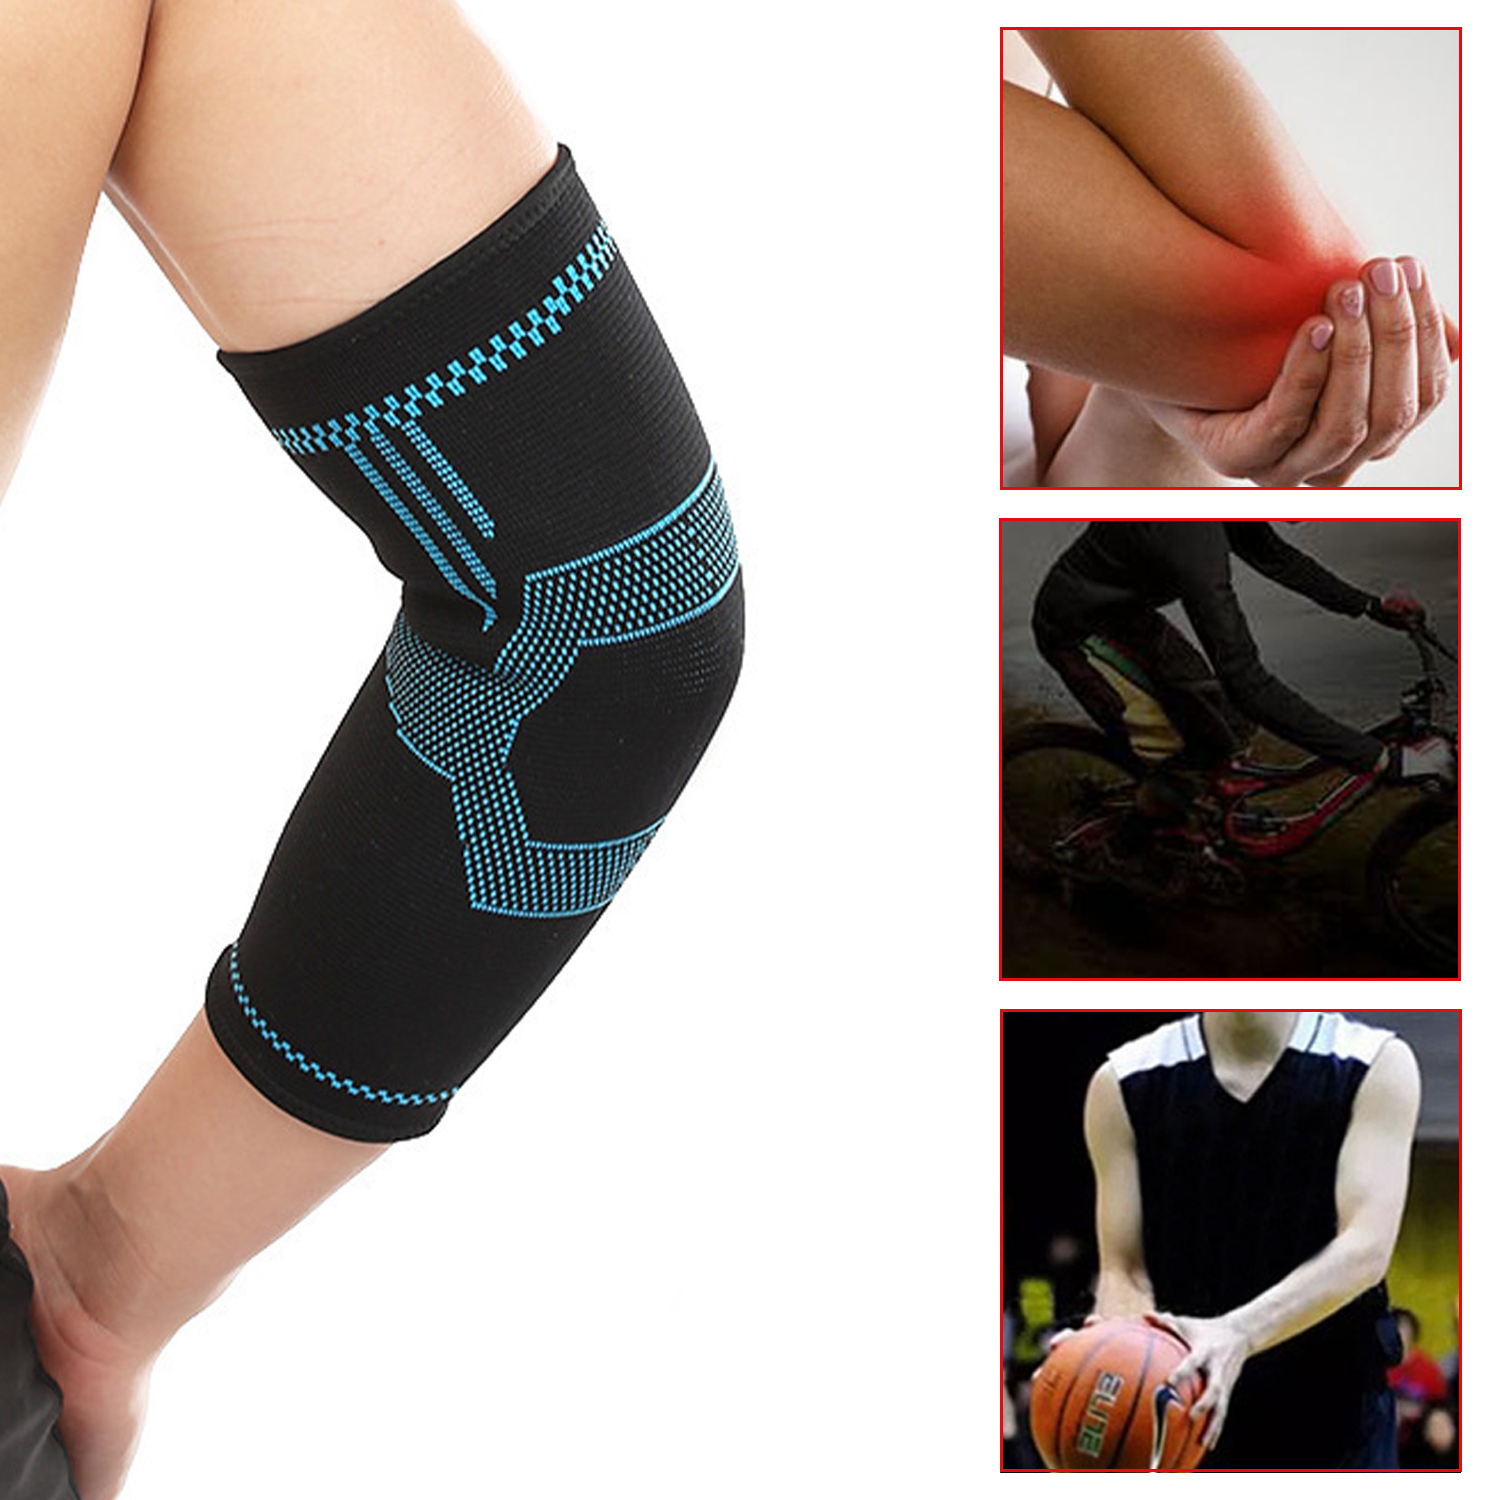 Knitted Elbow Brace Fitness Elastic Weaving Elbow Sleeve Training Elbow Support Brace